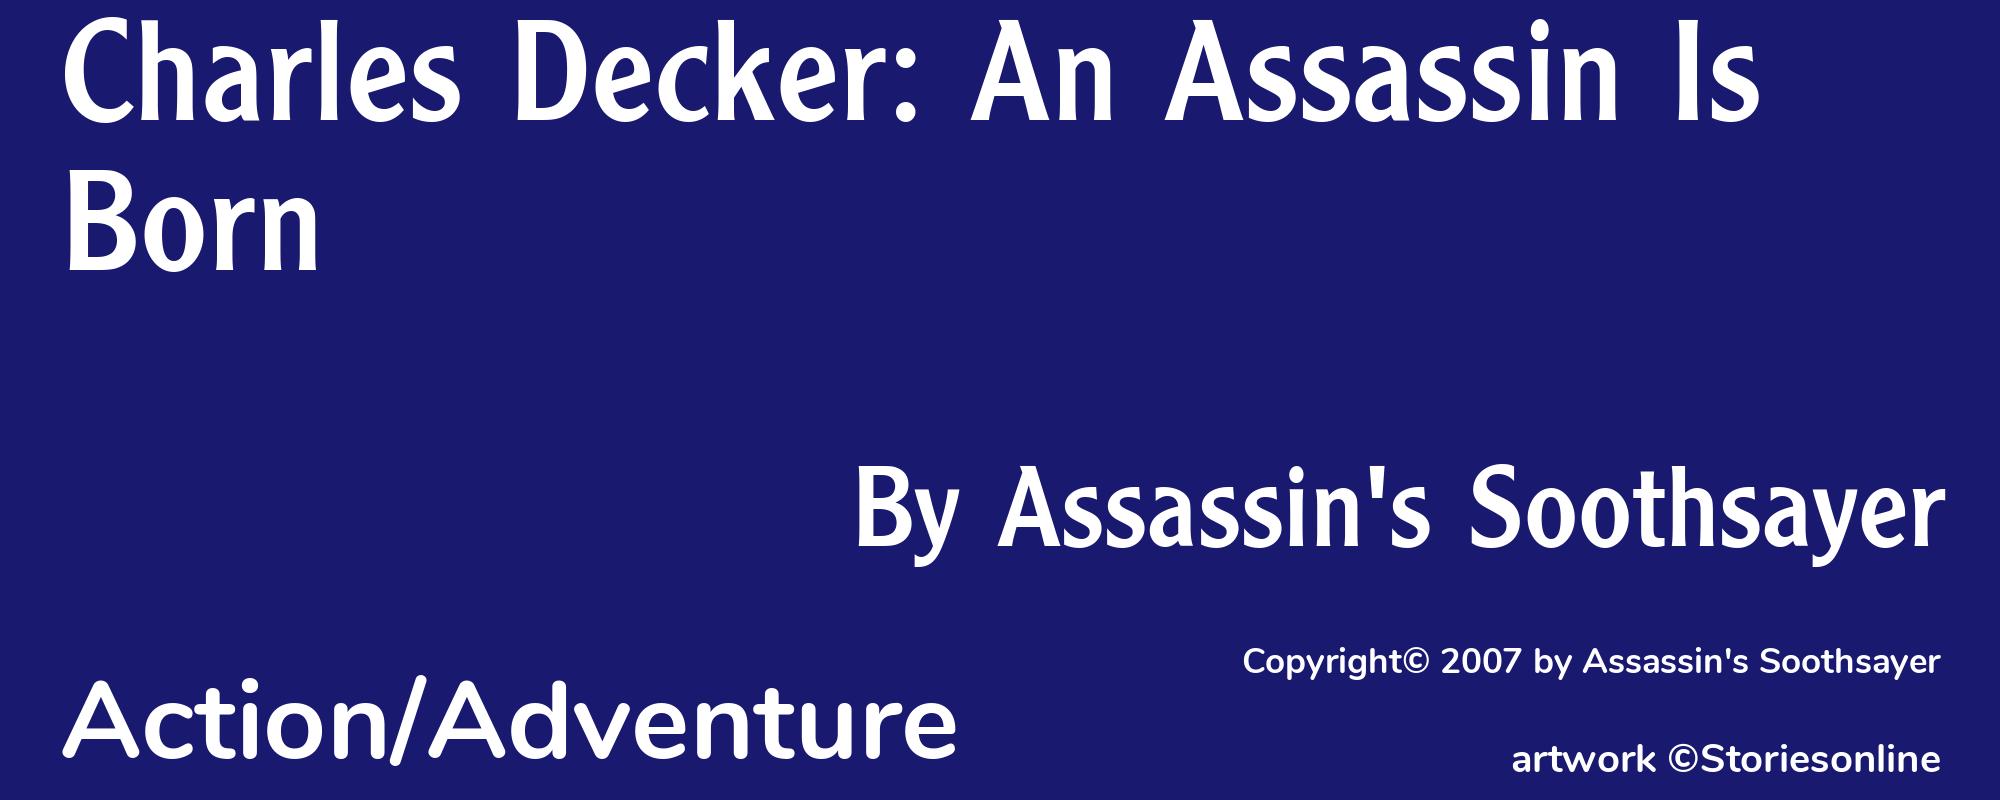 Charles Decker: An Assassin Is Born - Cover